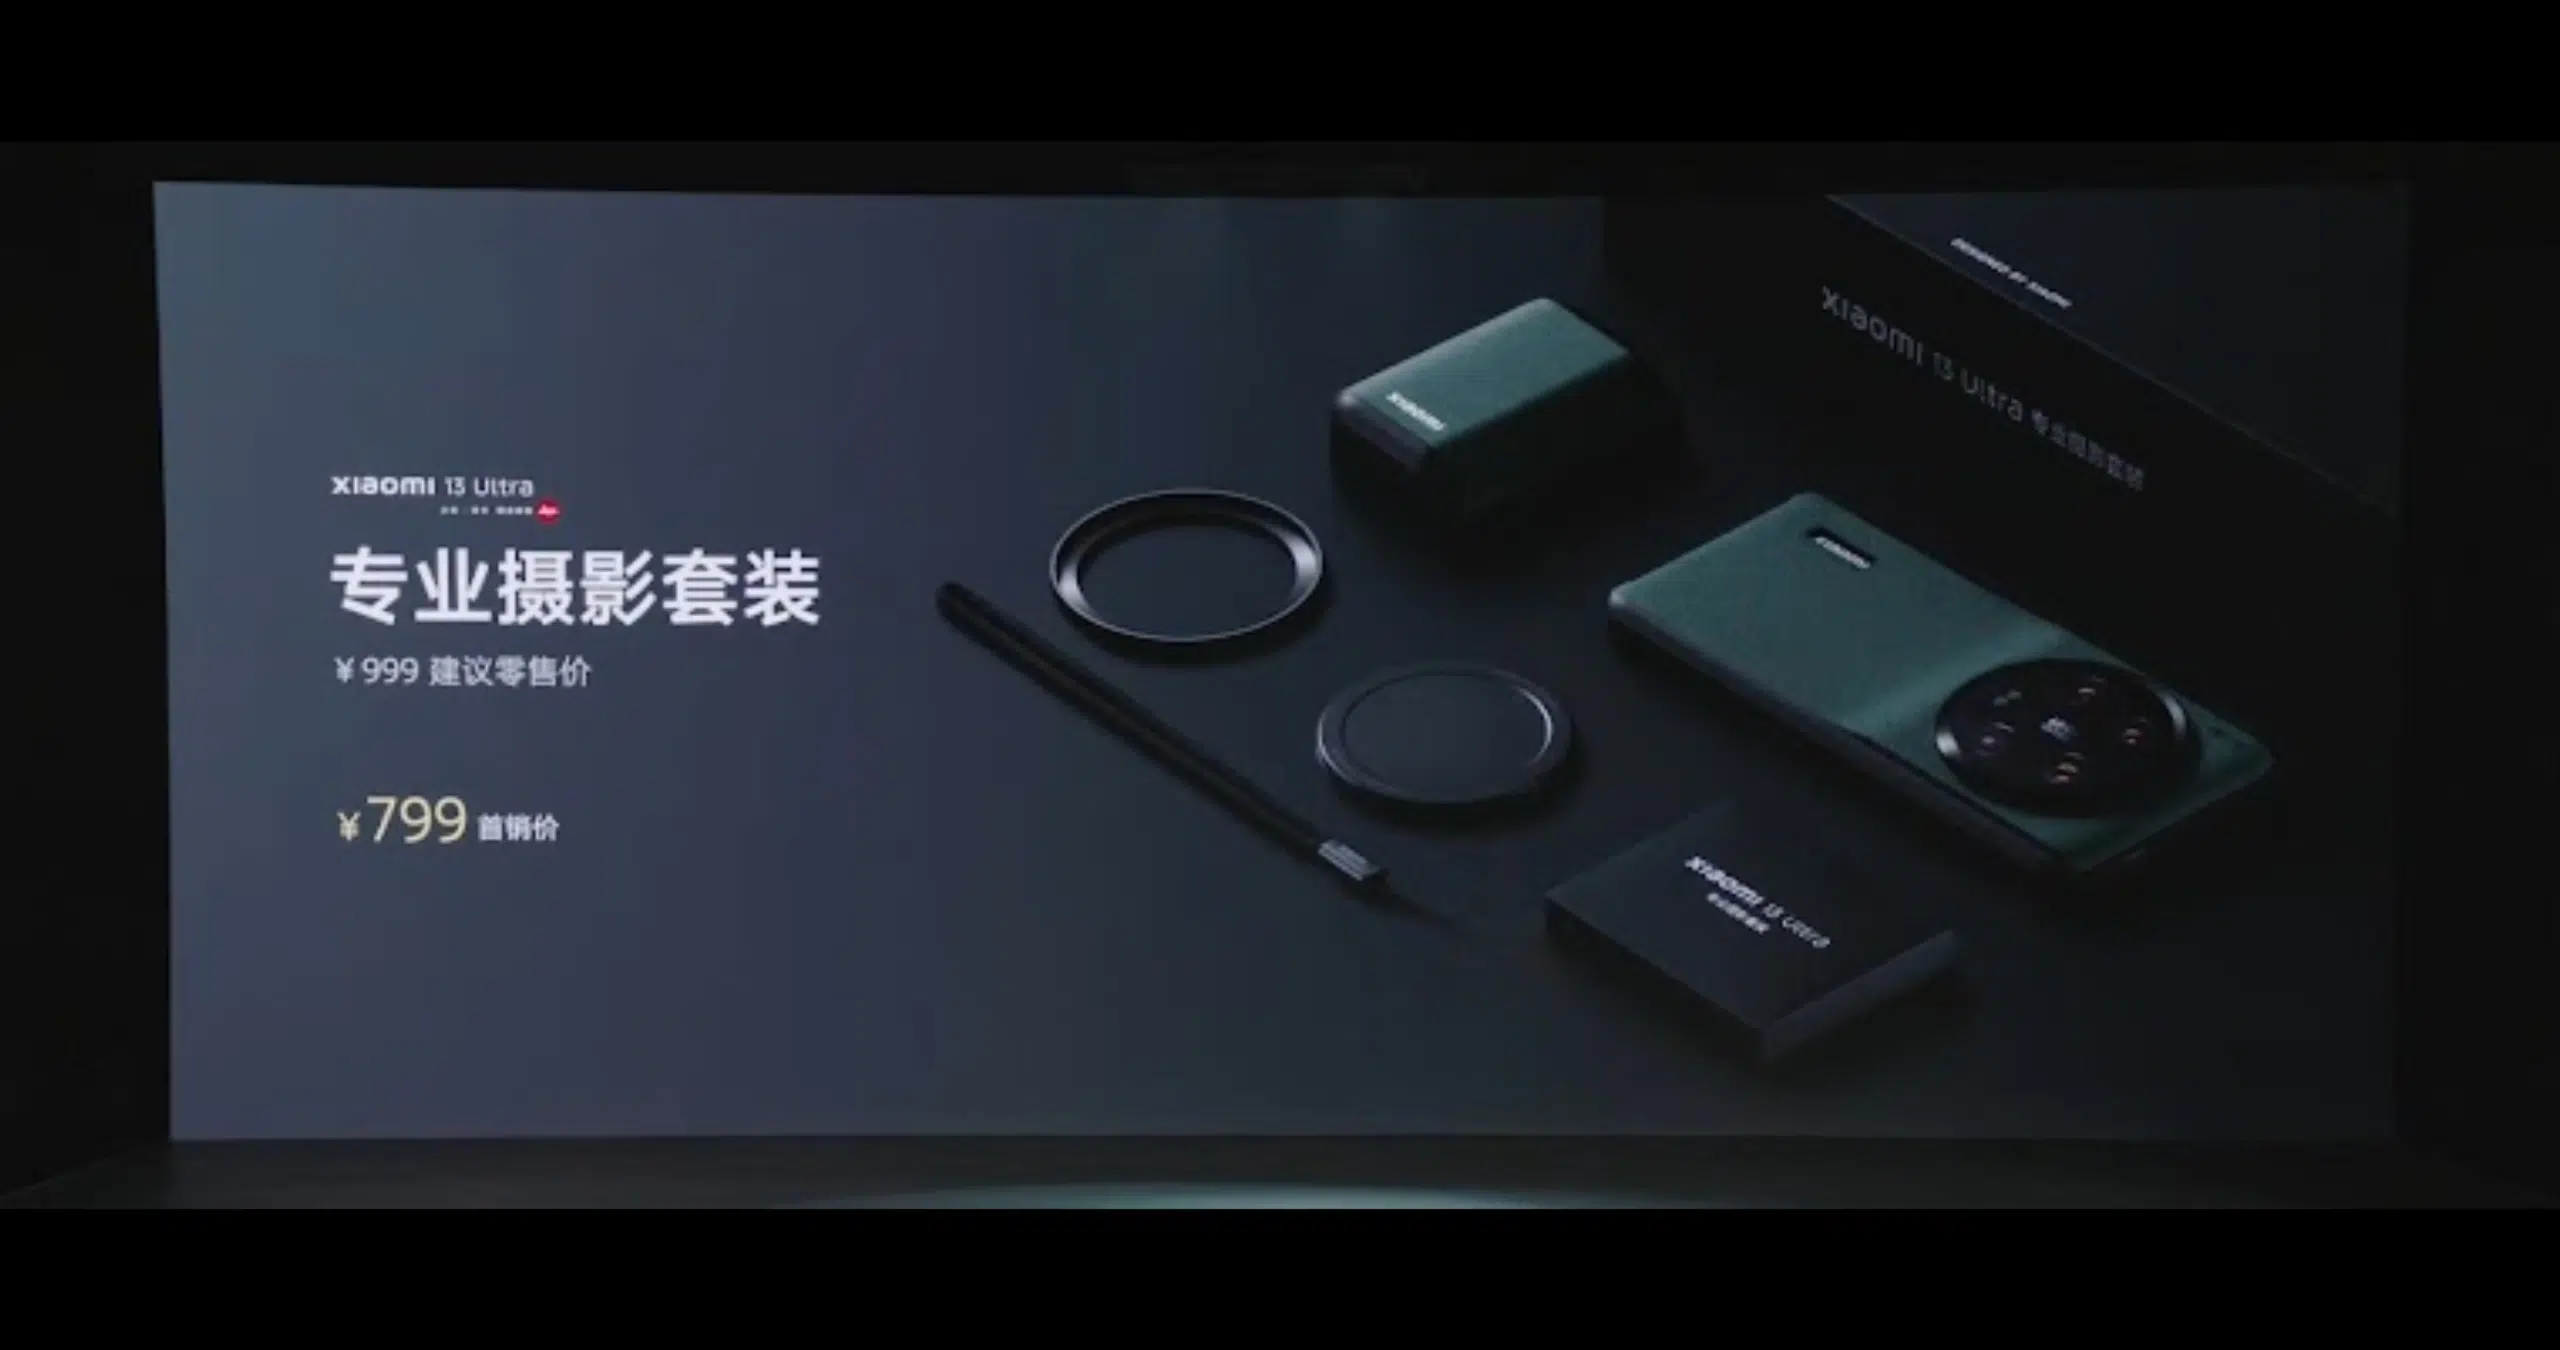 Xiaomi 13 Ultra launched Globally